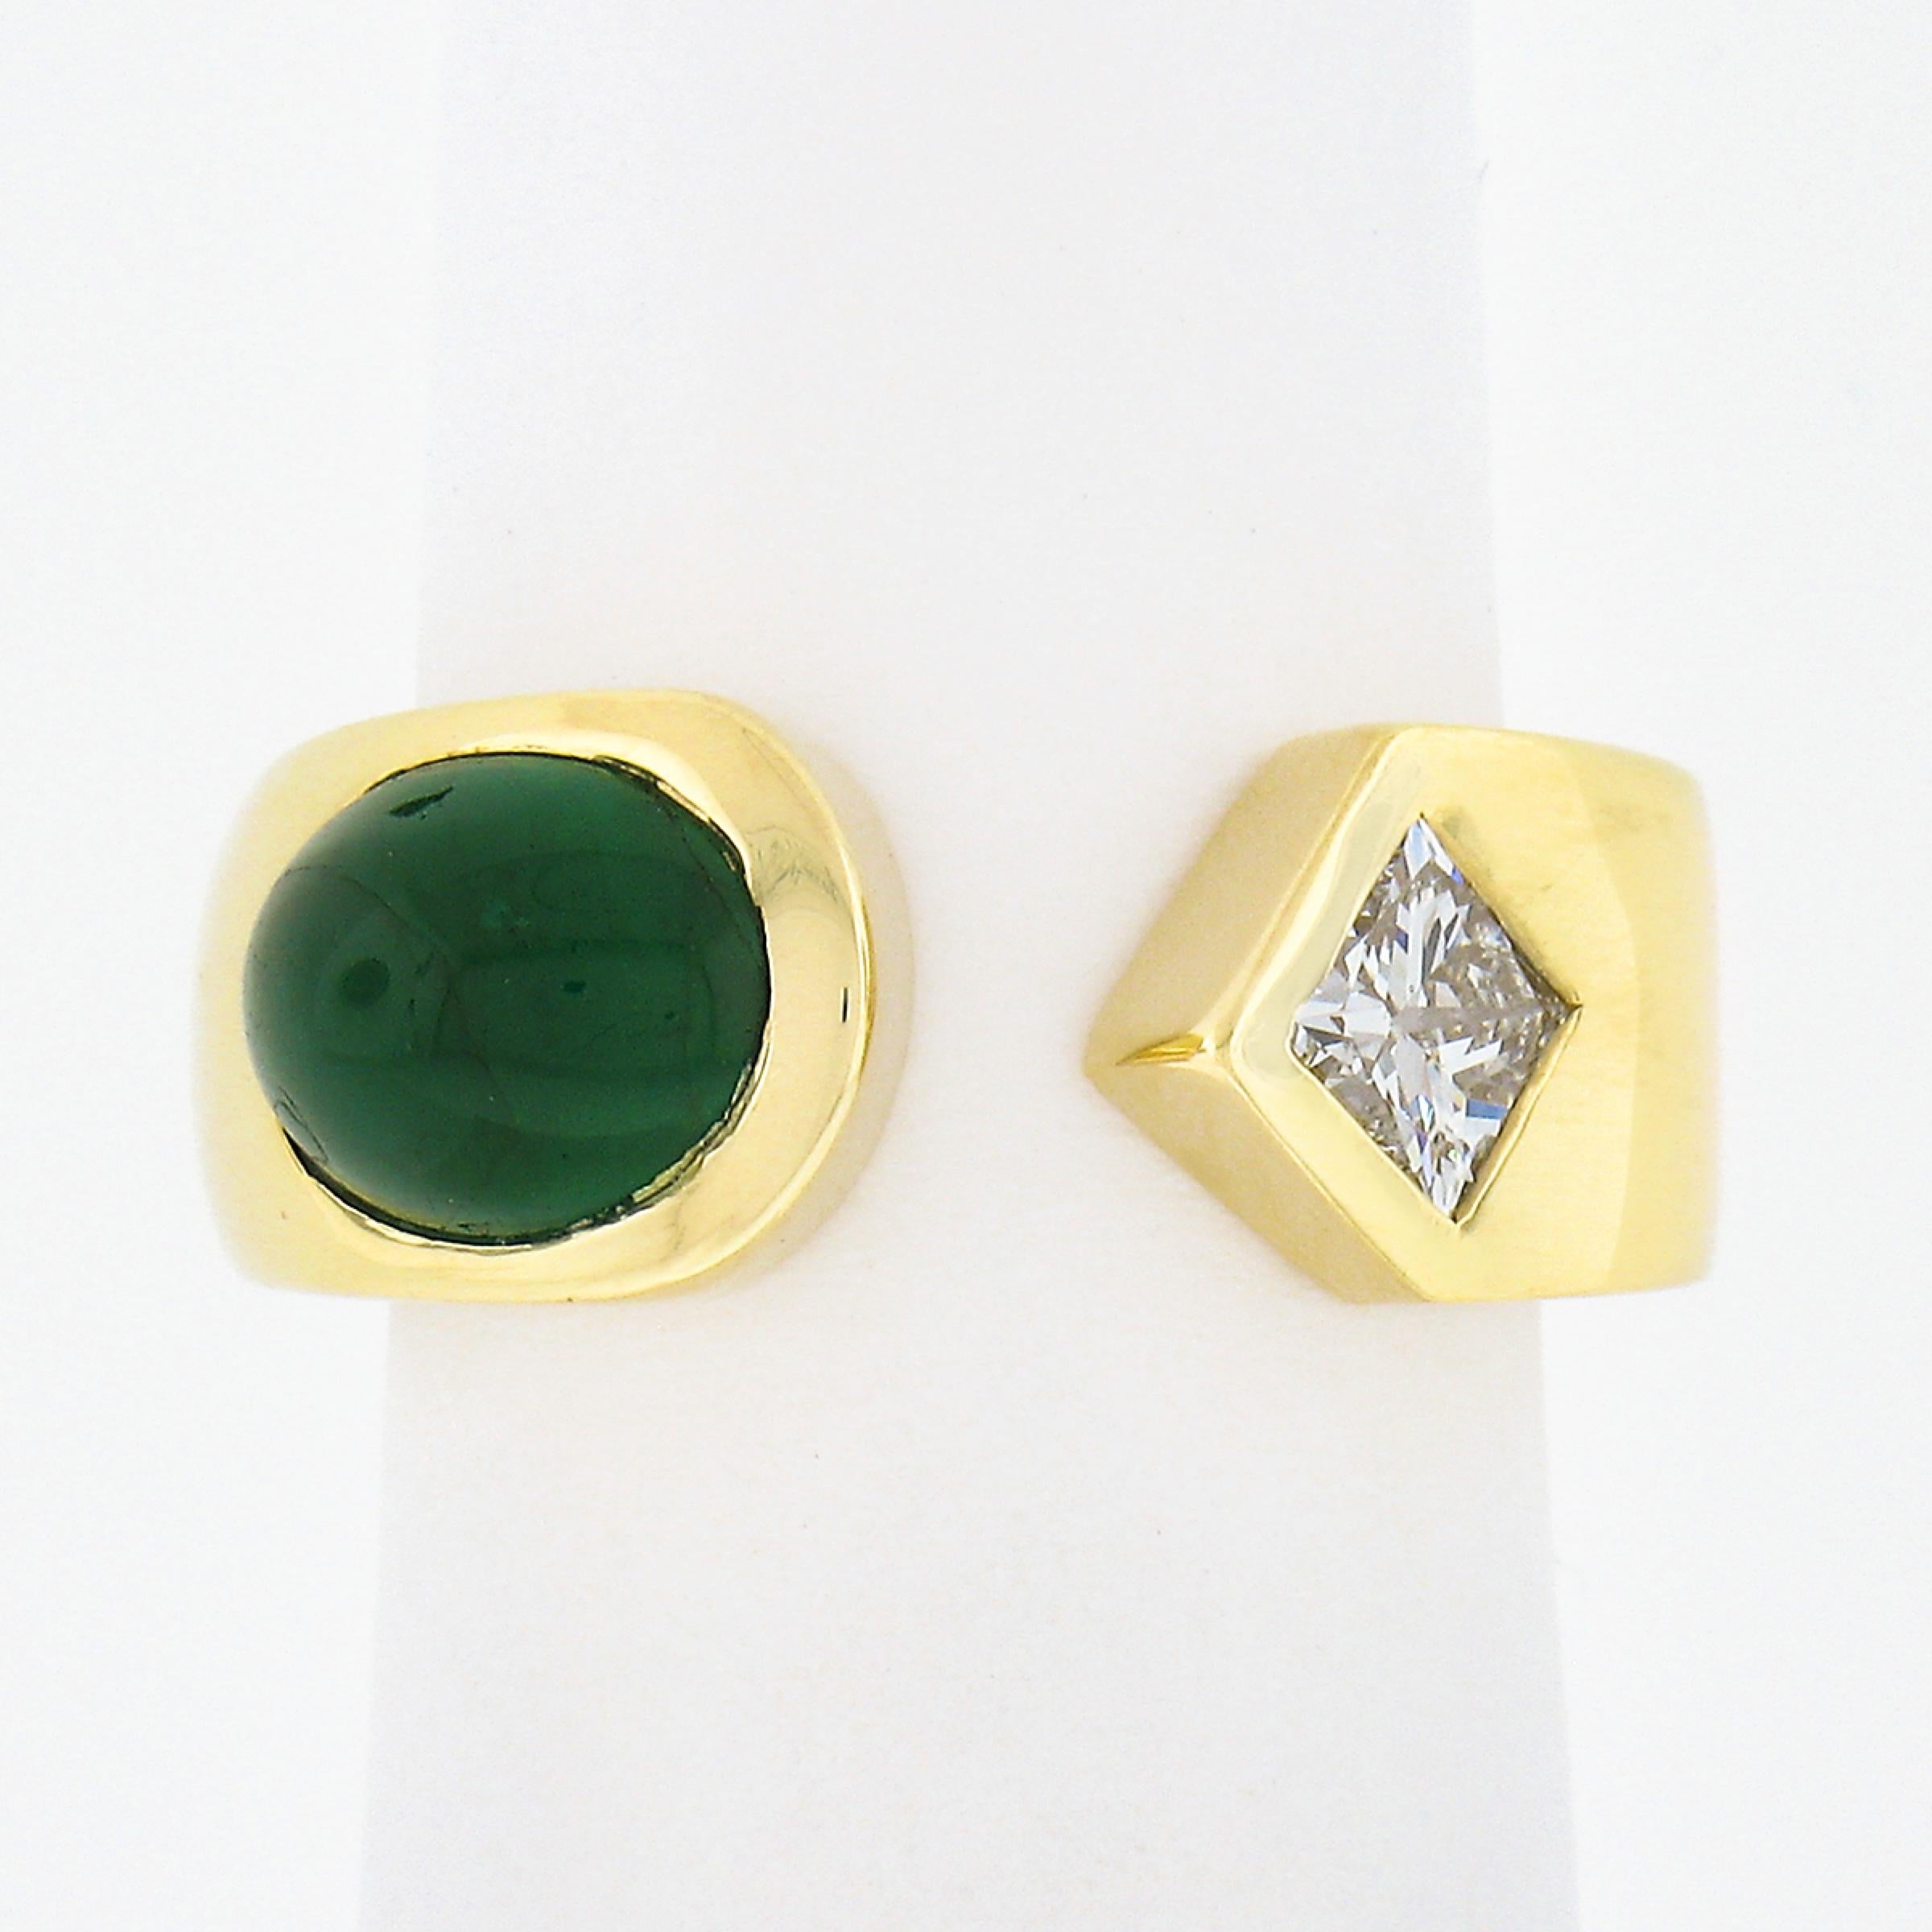 This beautiful and very well made ring is crafted from solid 18k yellow gold featuring an elegant cuff style with an open top that is neatly set with a fine natural emerald stone at one side and a stunning diamond at the other. The oval cabochon cut